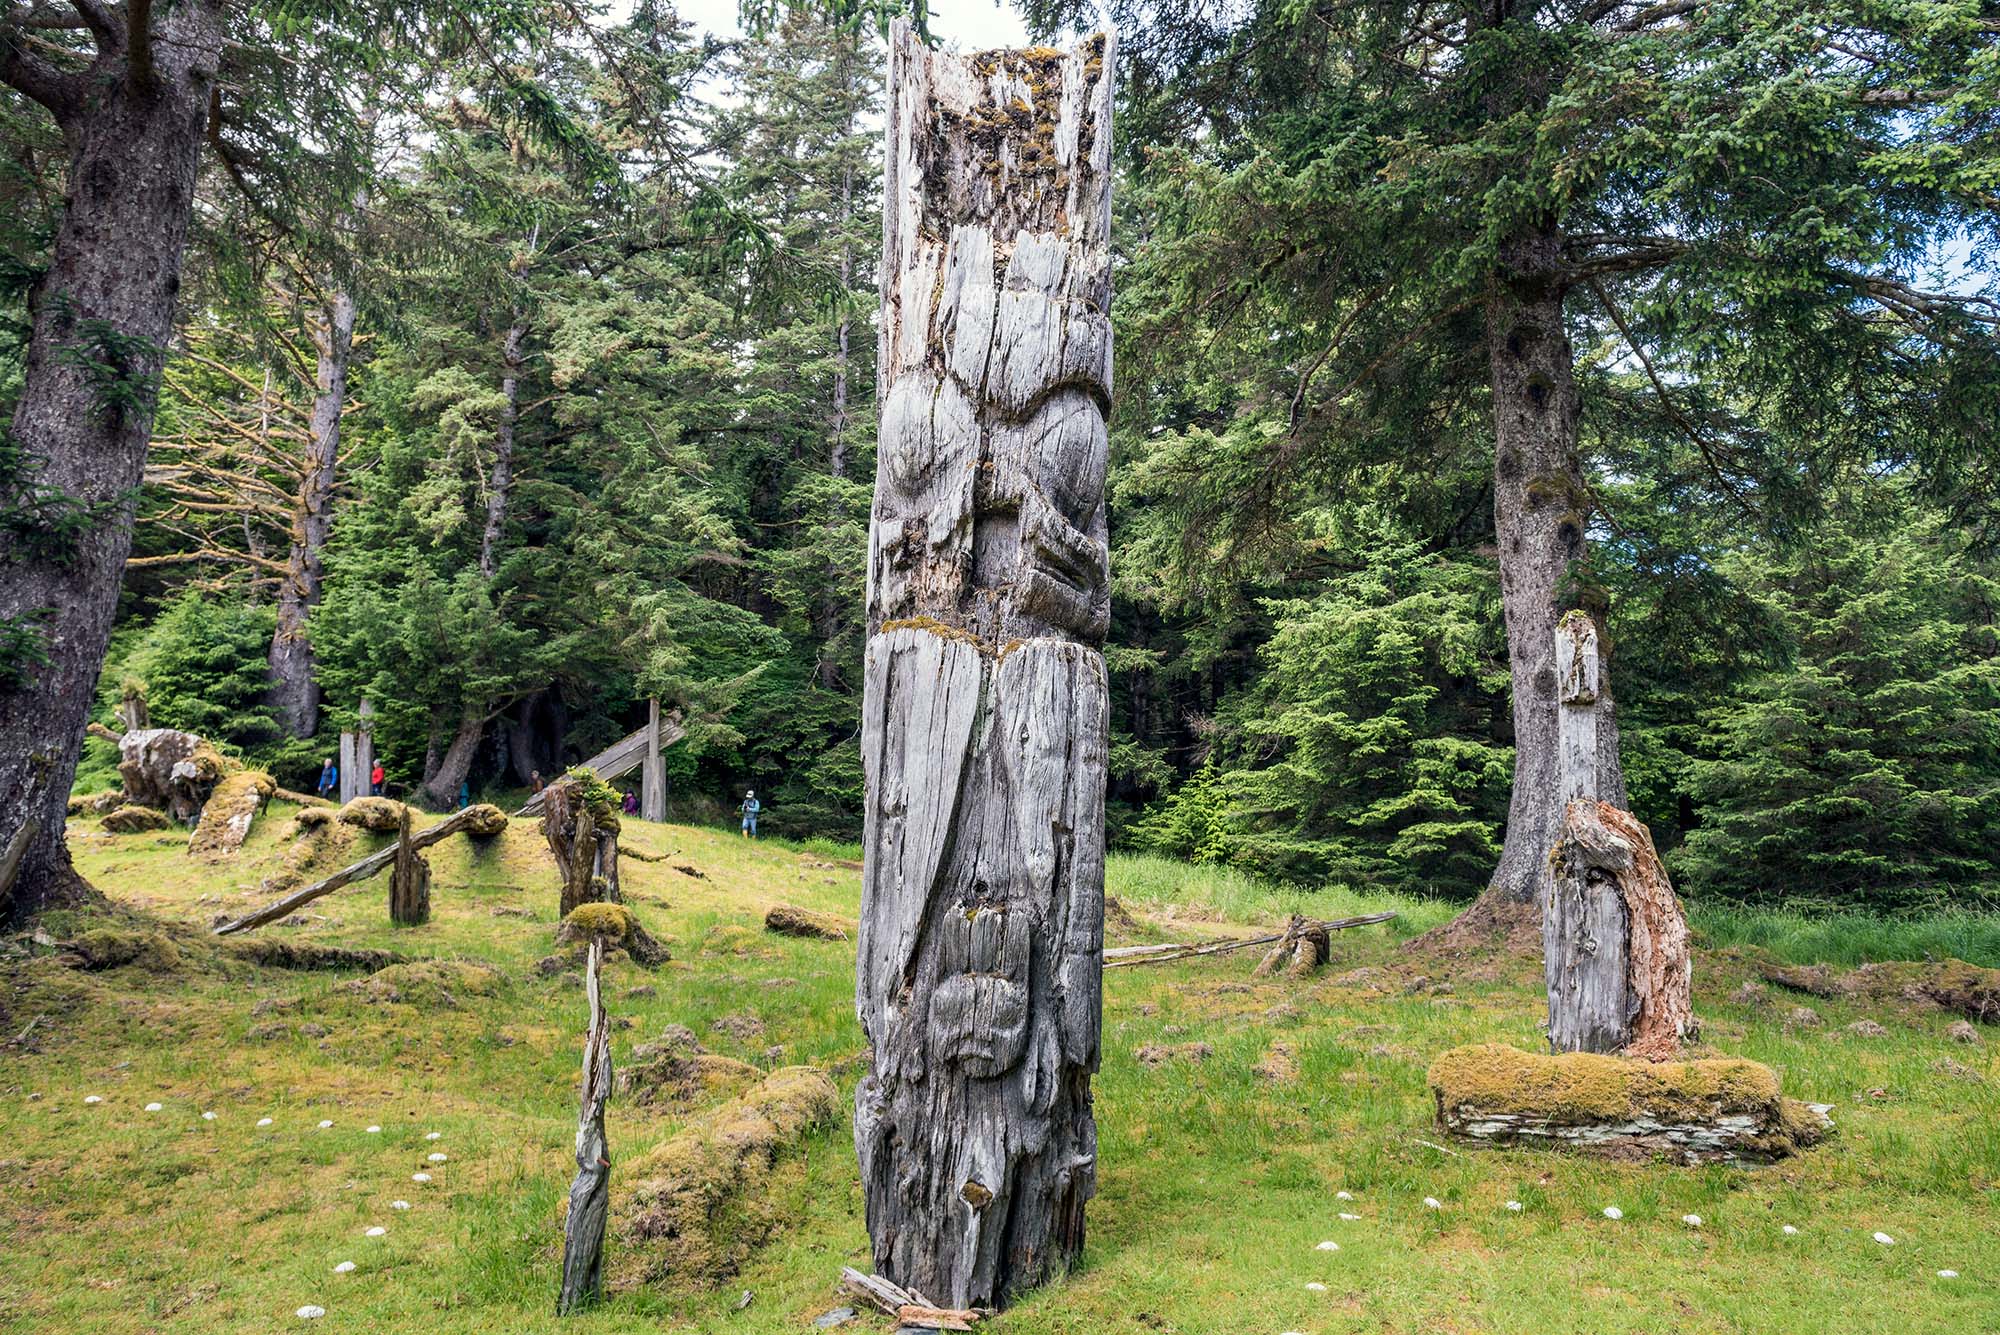 Weather-beaten totem poles standing on grassy ground in a forested area